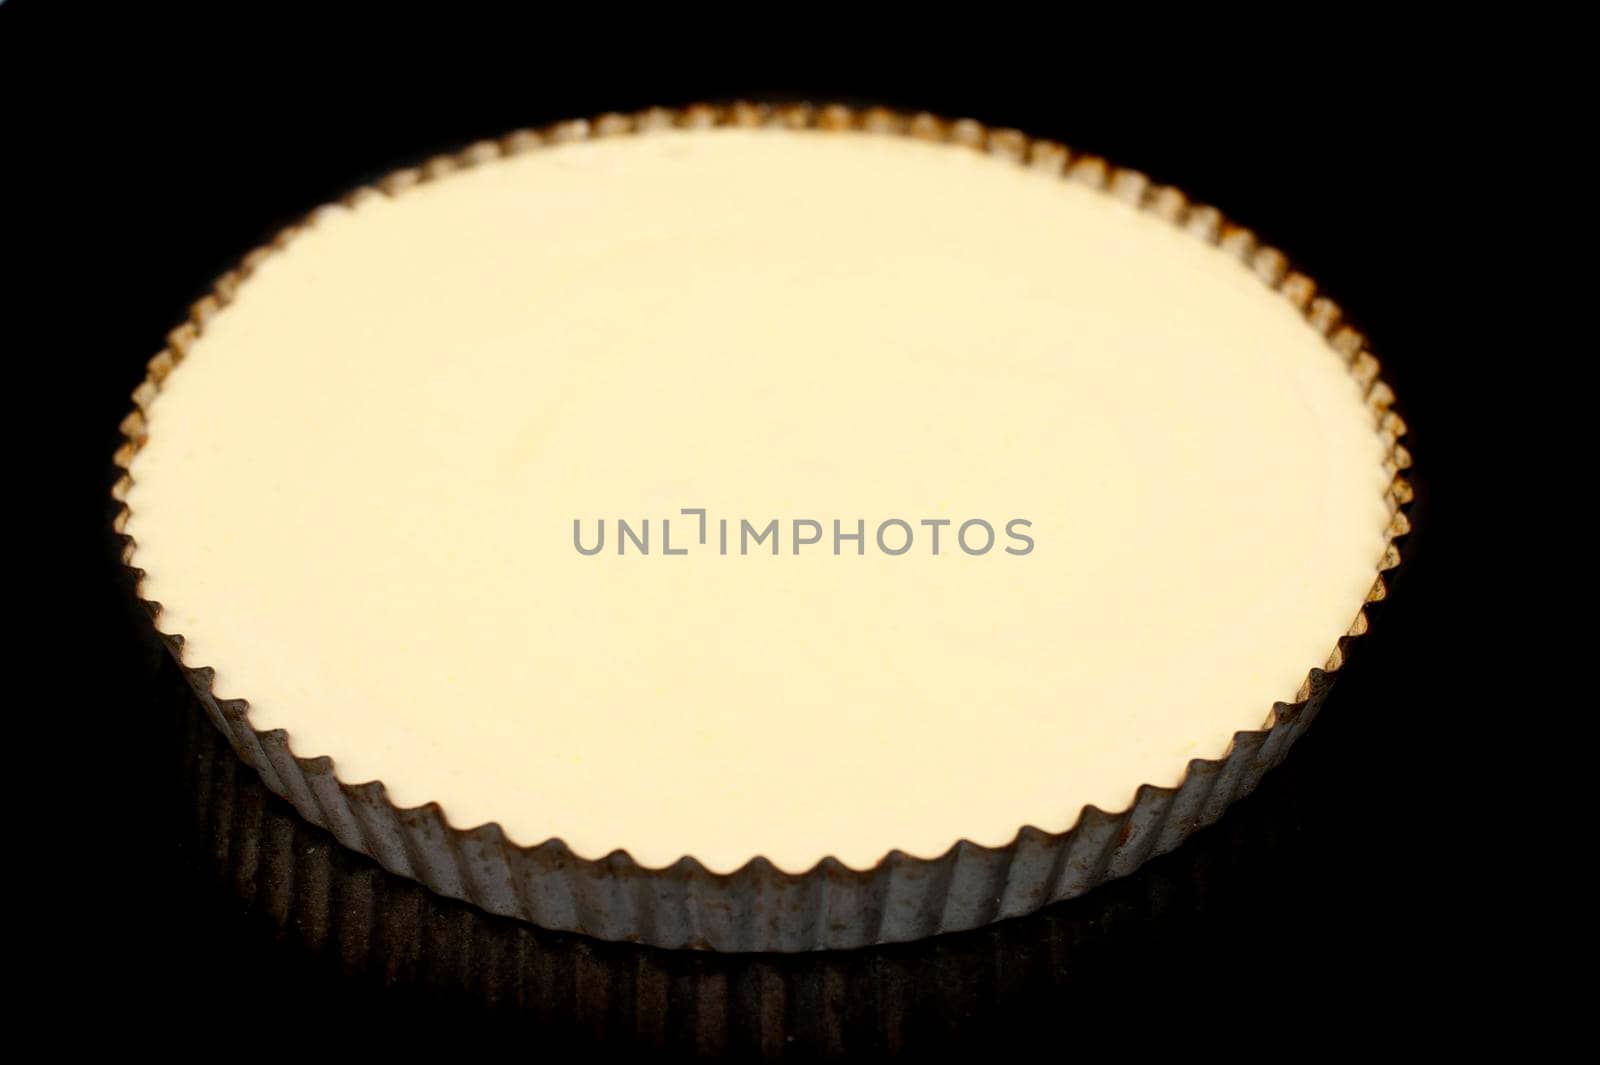 High angle view of a delicious plain baked cheesecake in a round fluted metal oven dish or pie pan on a dark studio background